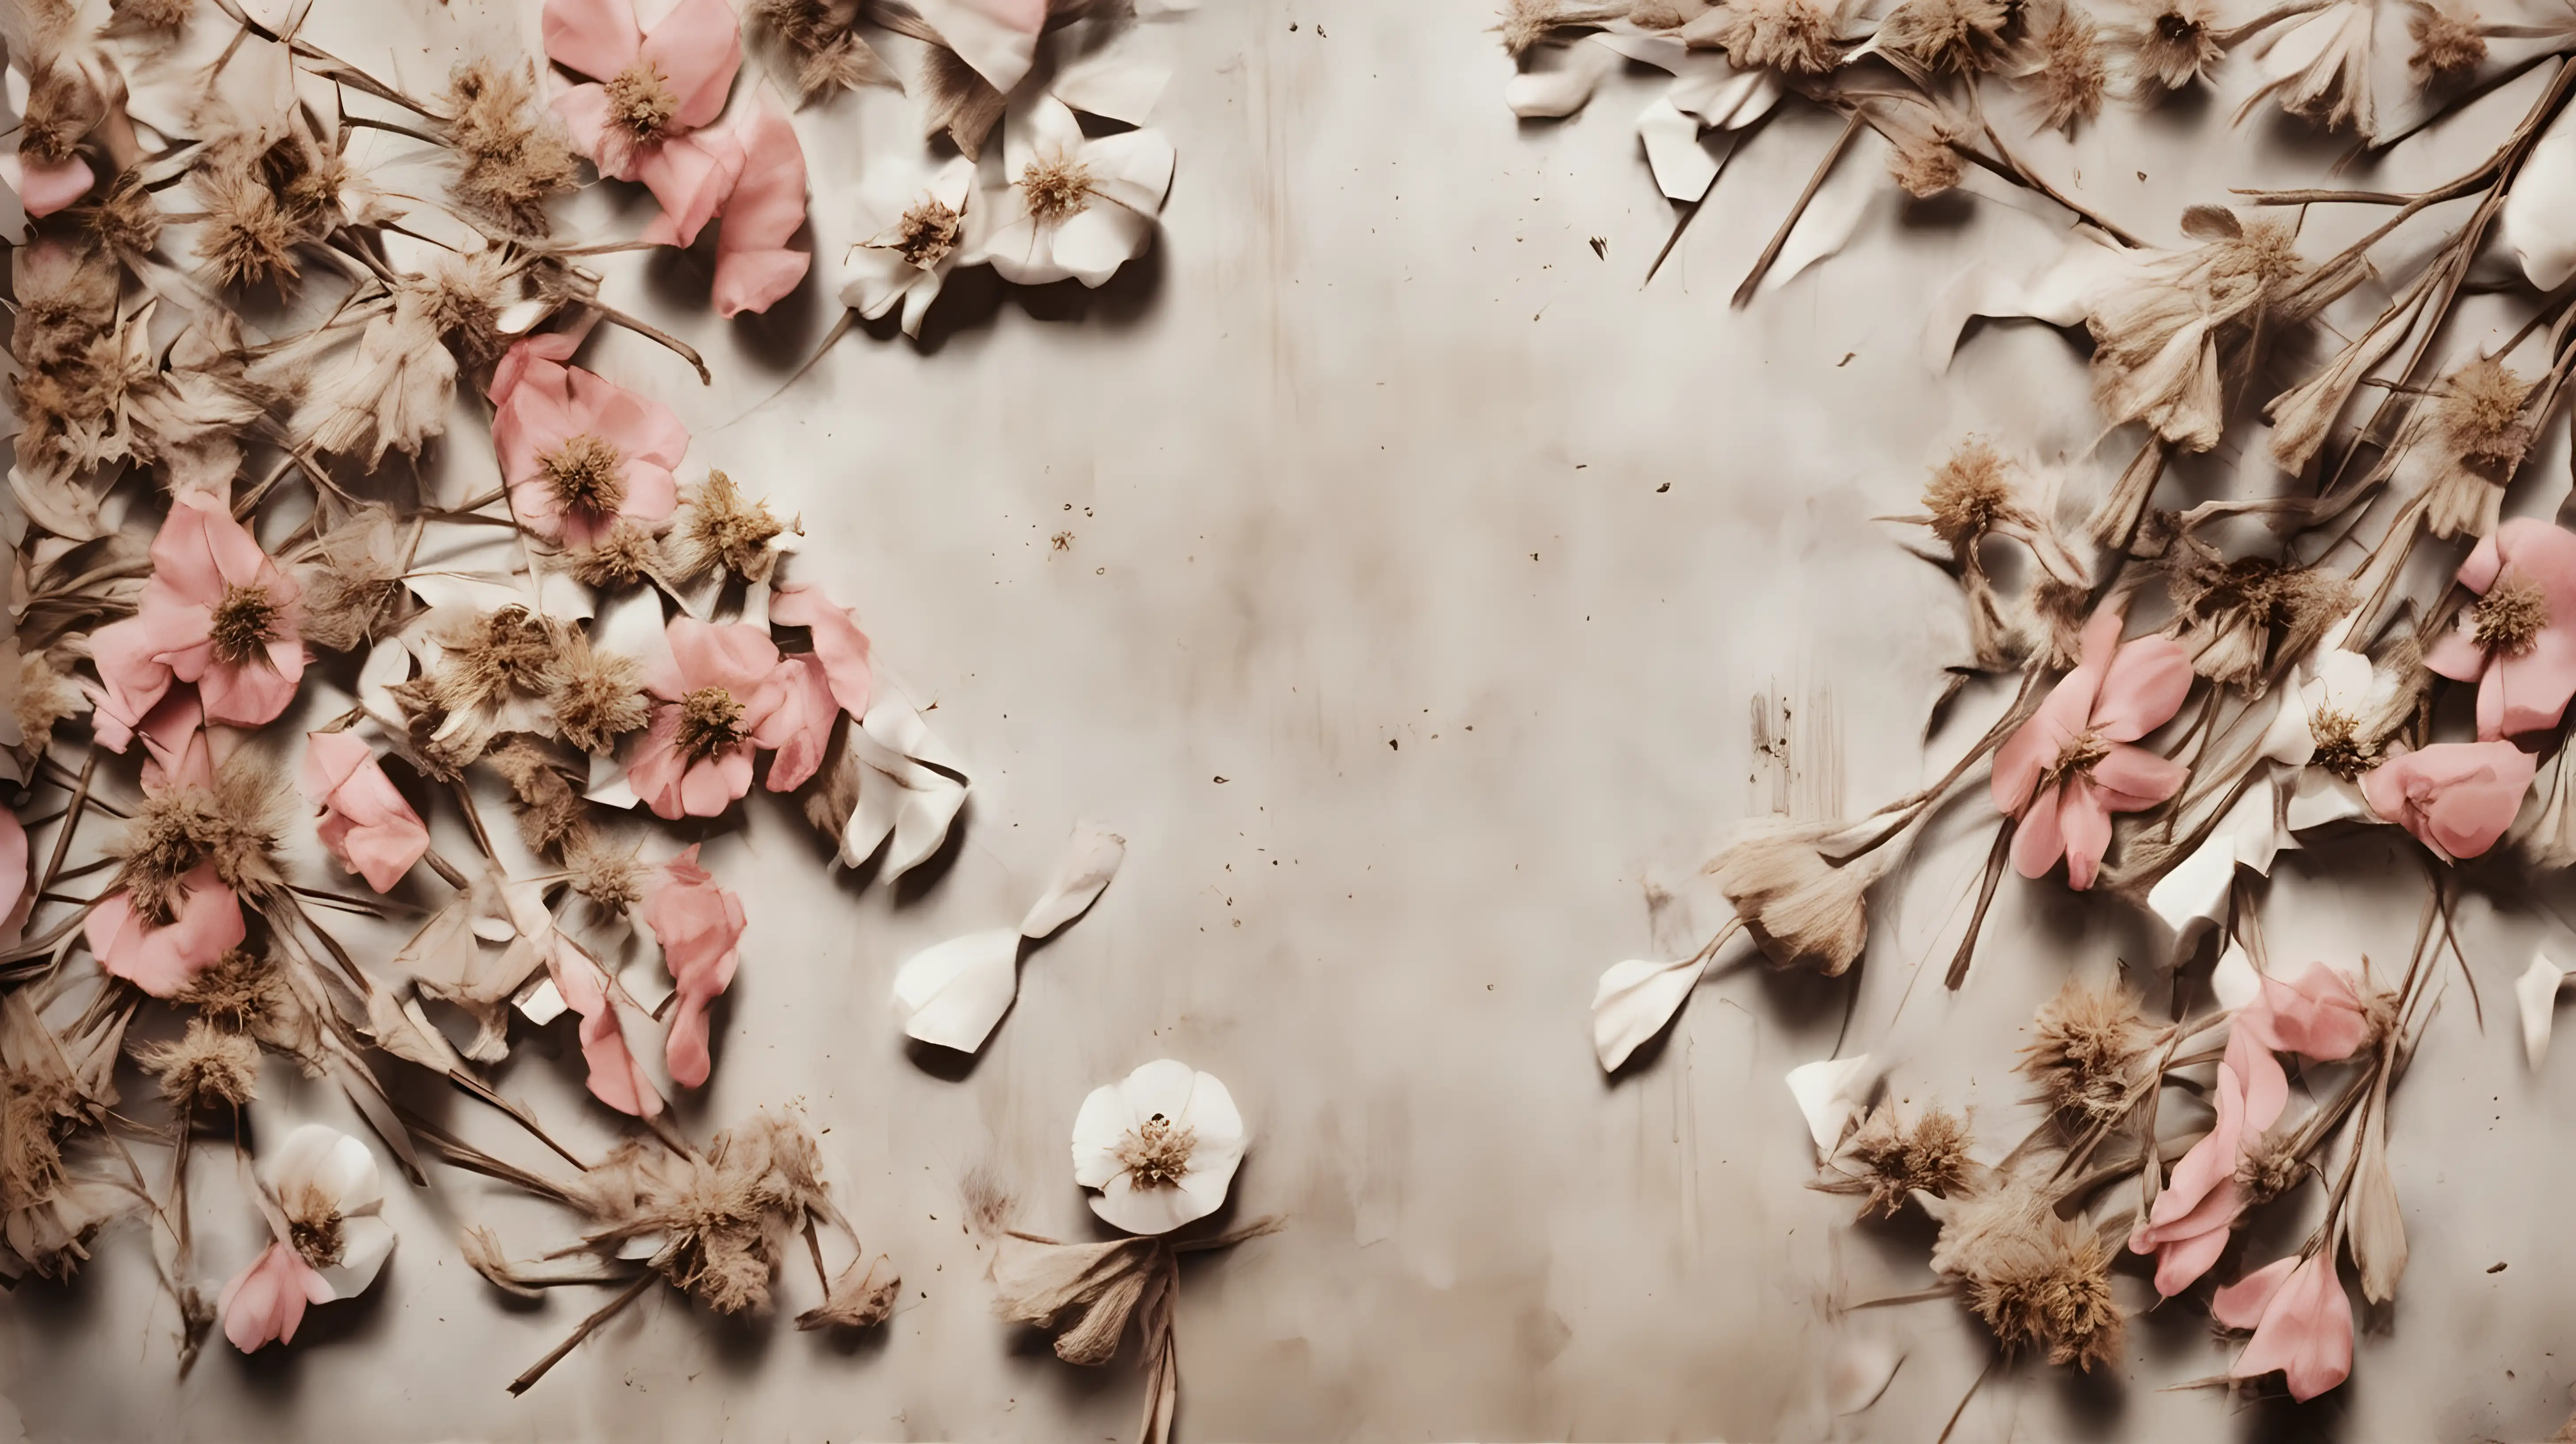 Elegant Grungy Decor with Dried and Pink White Blossoms